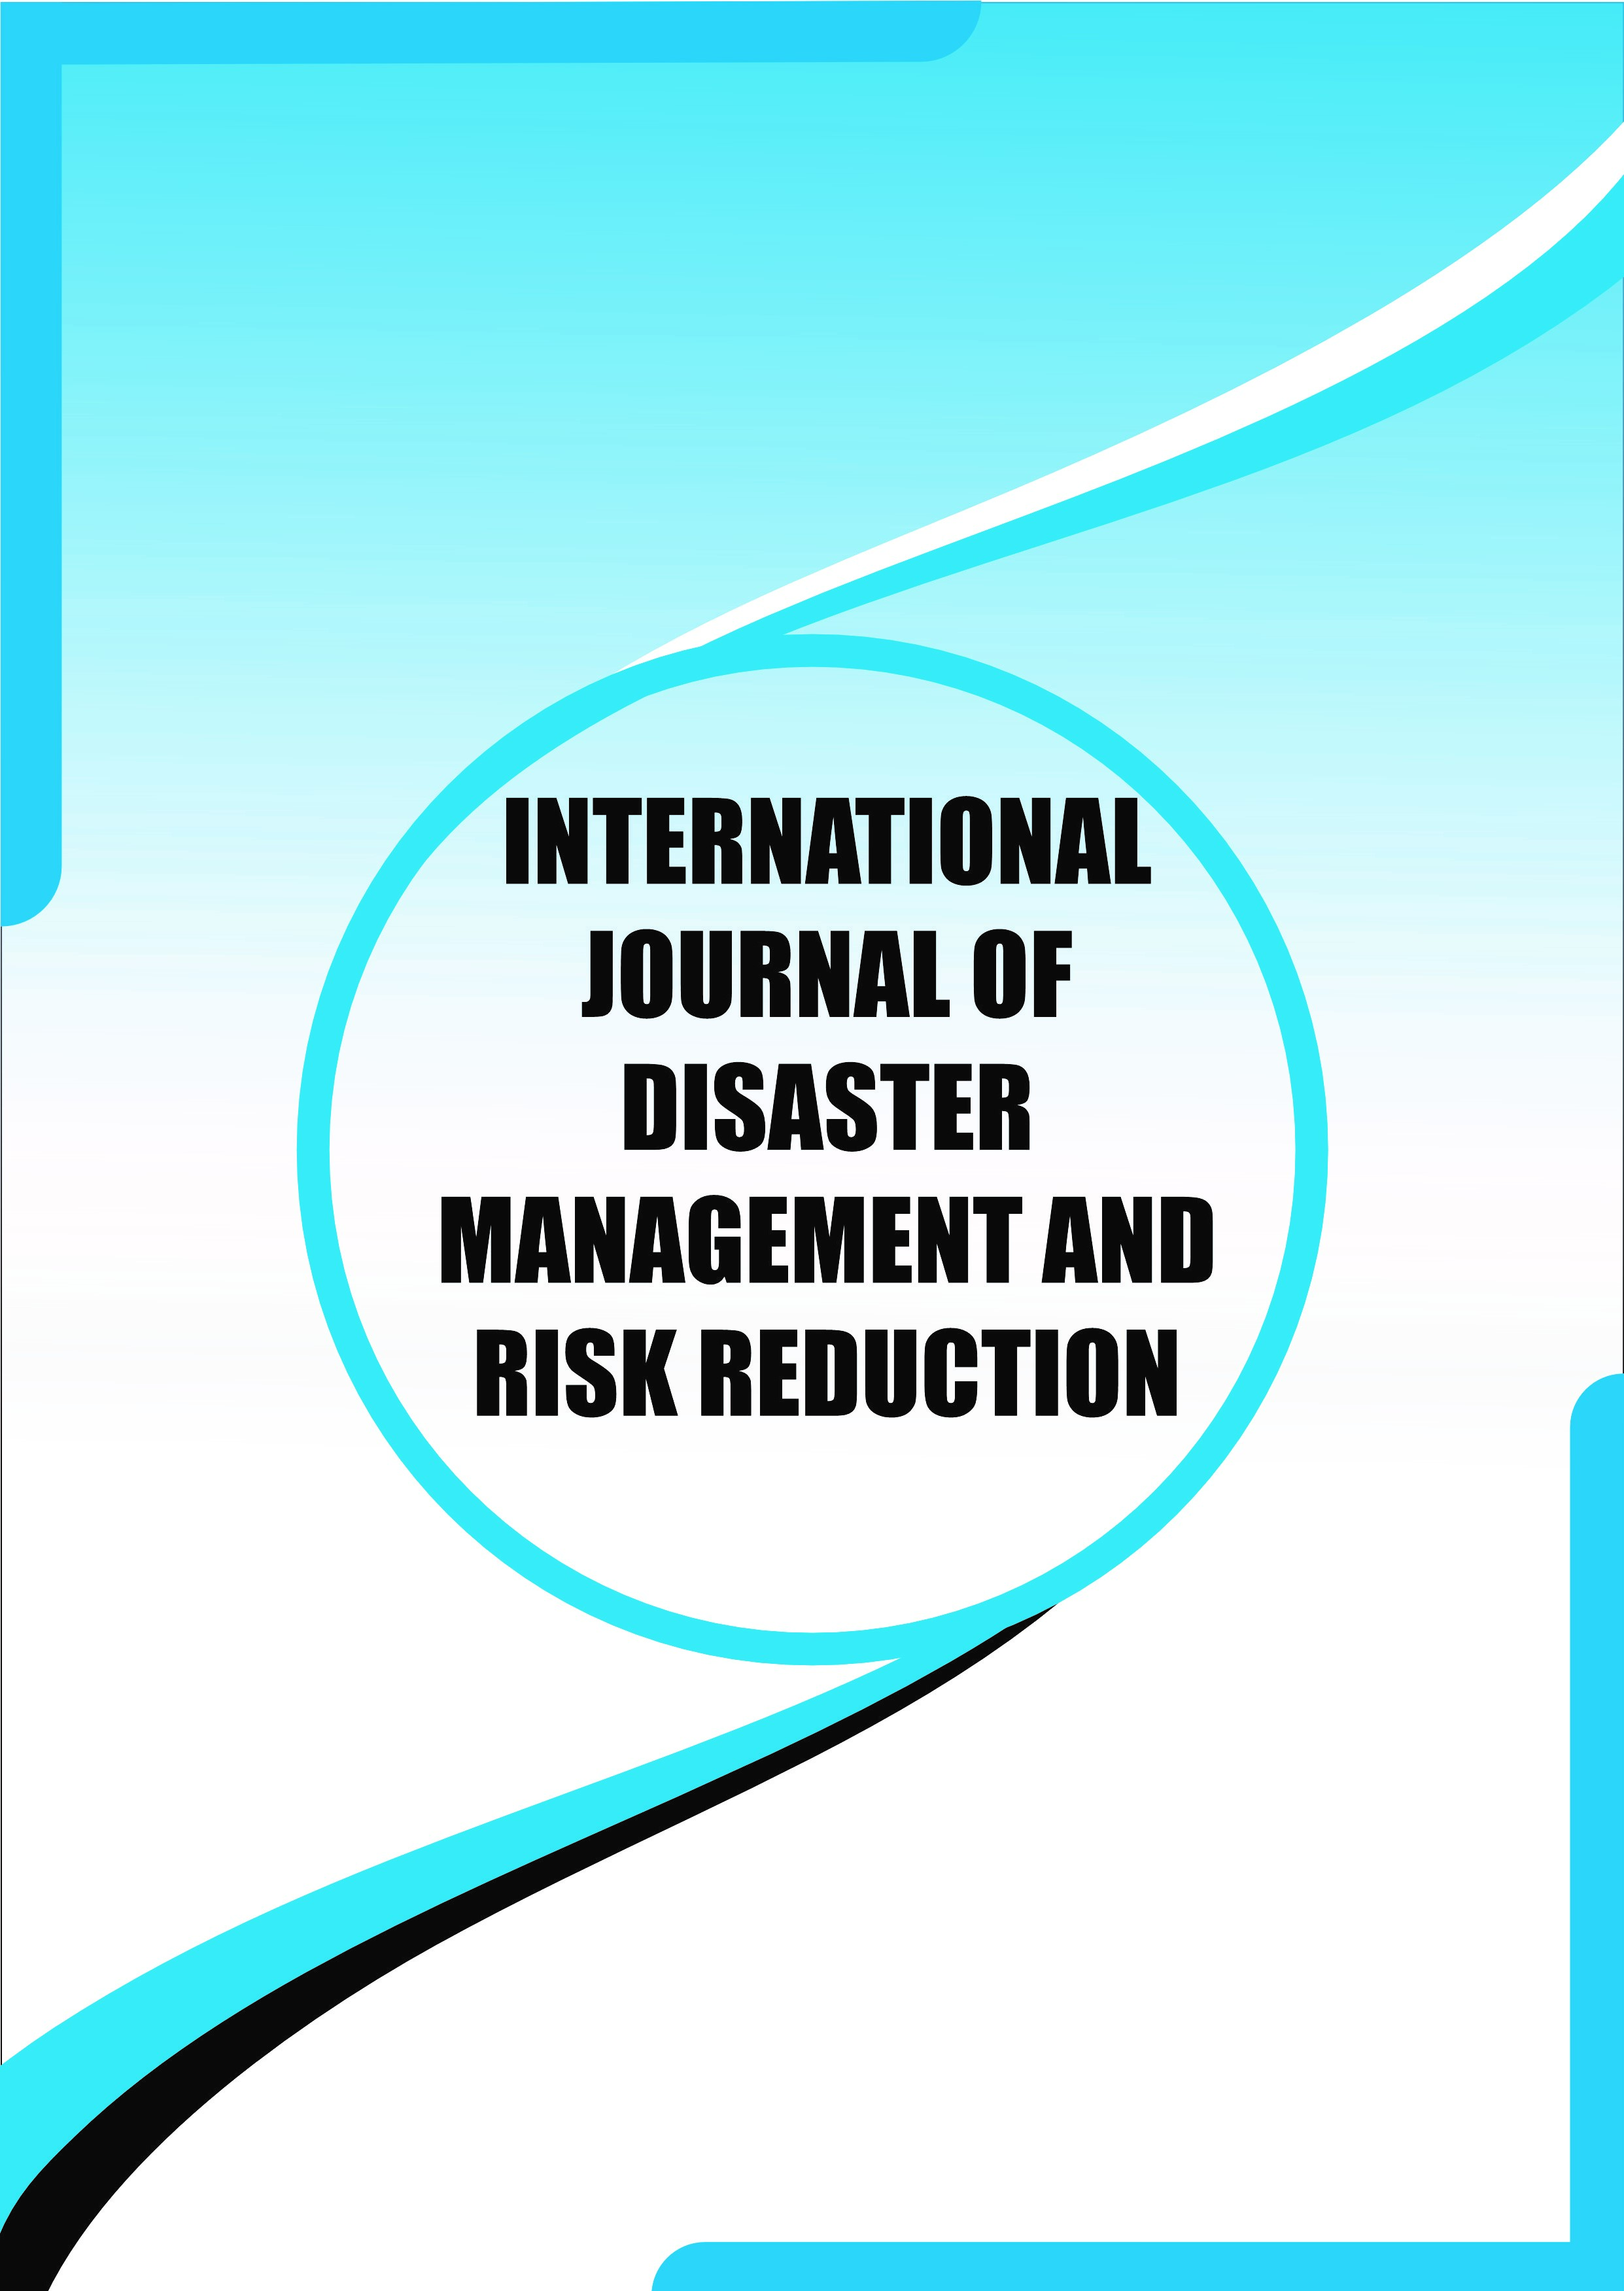 International Journal of Disaster Management and Risk Reduction